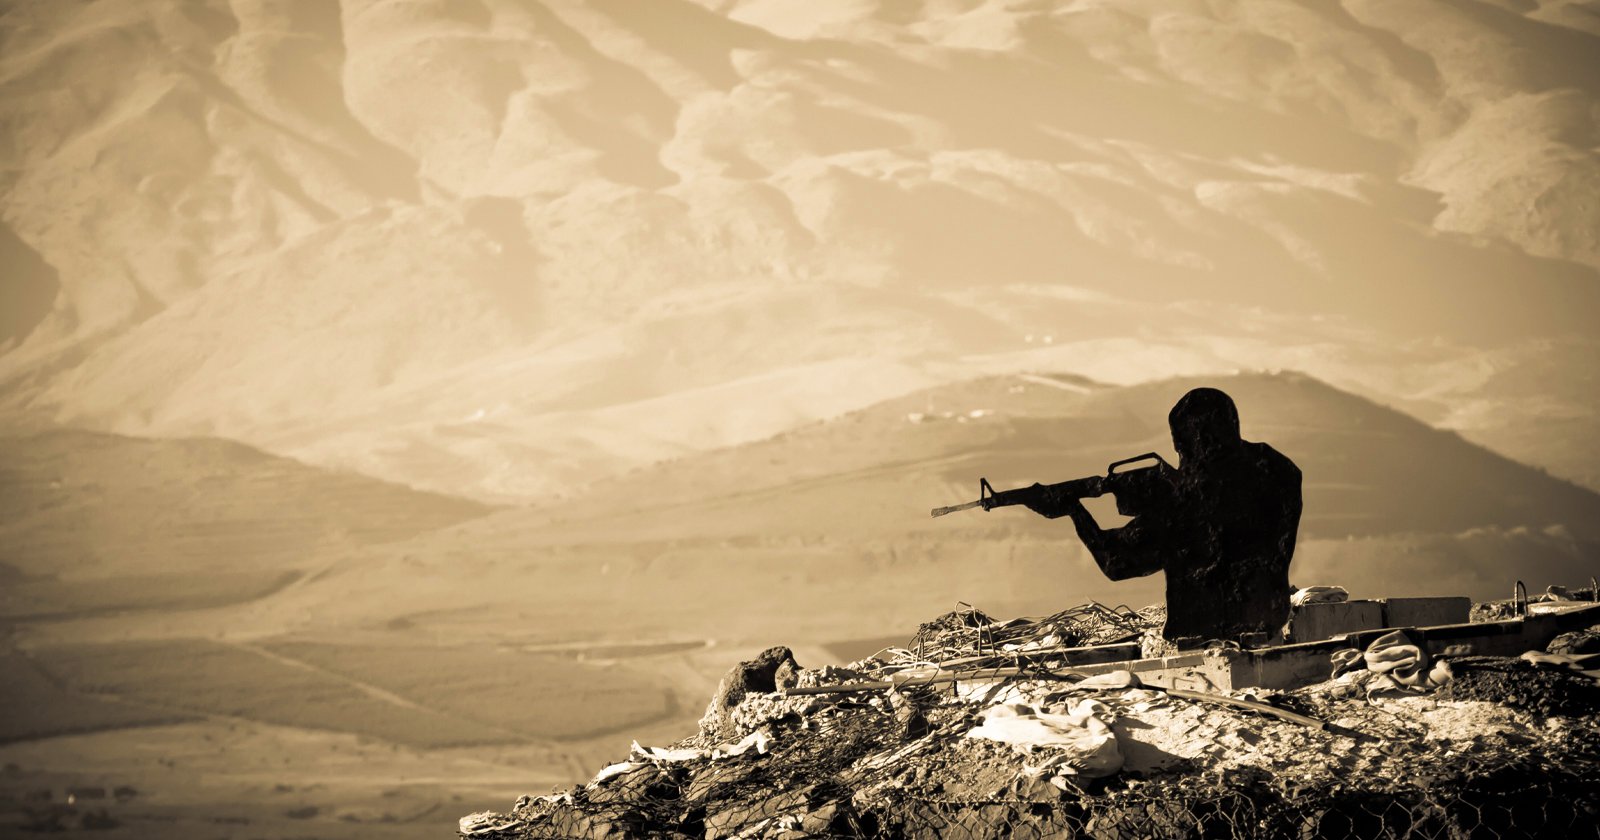 Photojournalist Shares His Experience of Documenting the War on ISIS | PetaPixel